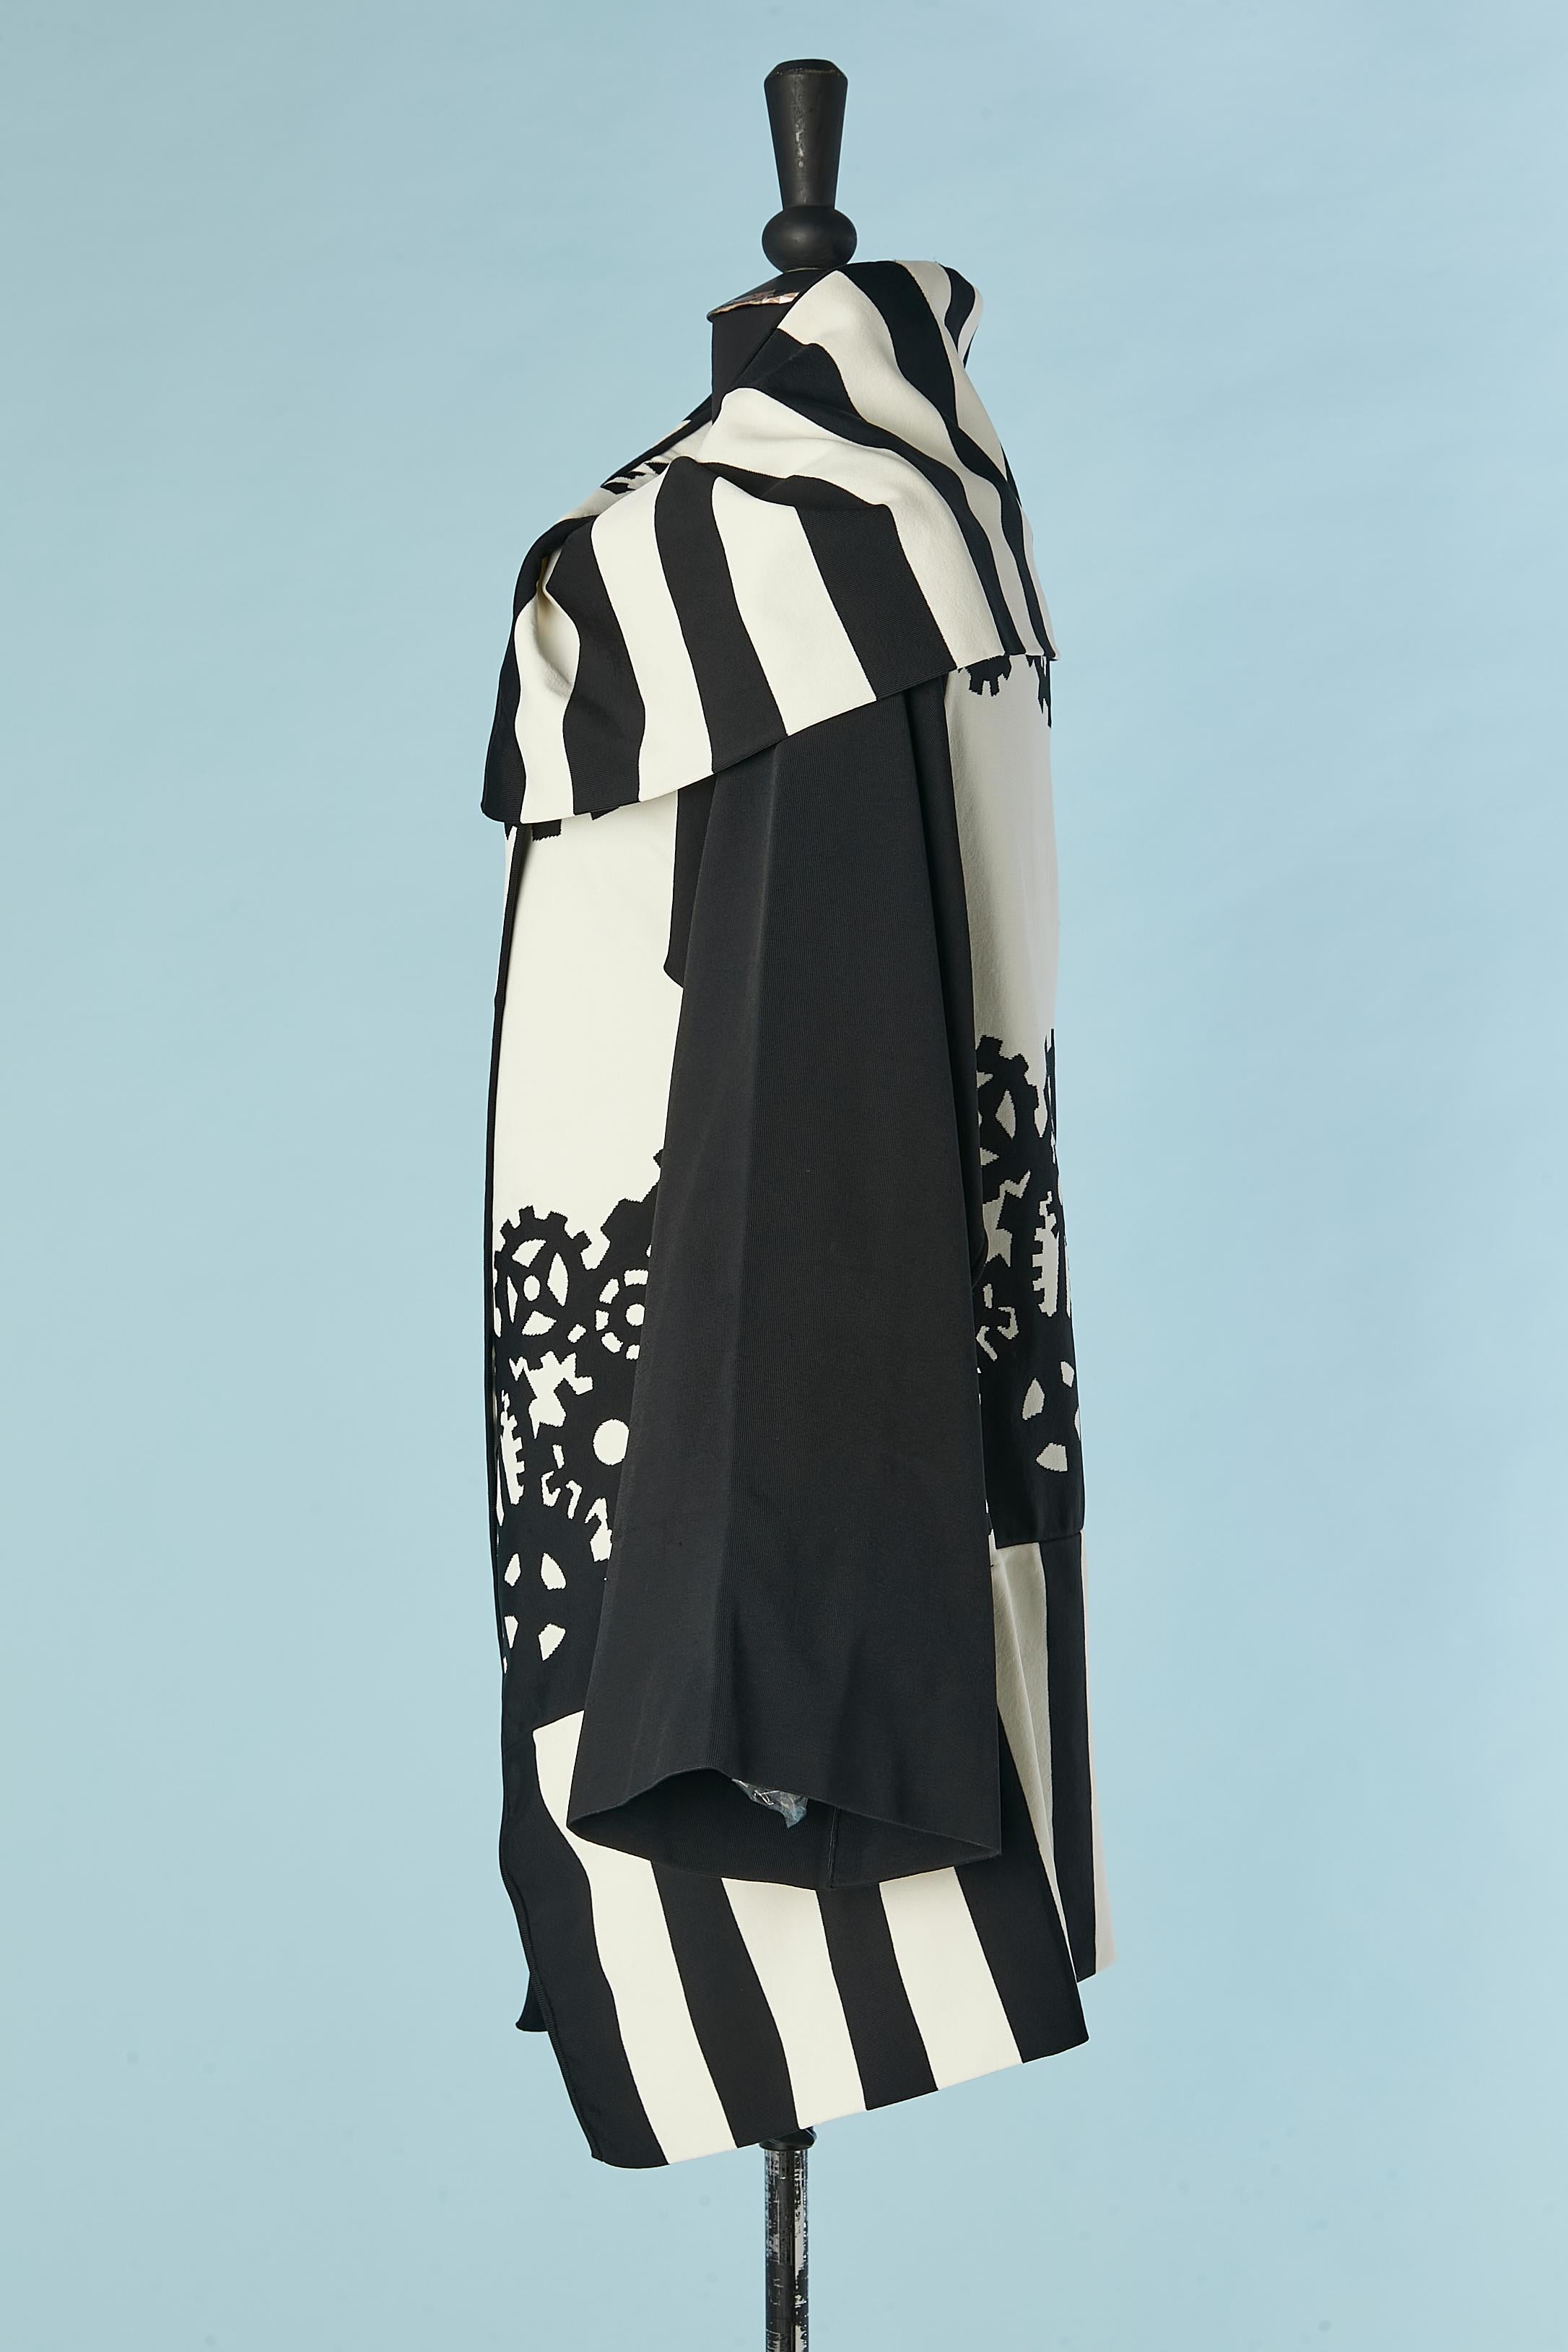 Black and white double breasted jacket in rayon knit Jean-Charles de Castelbajac For Sale 2